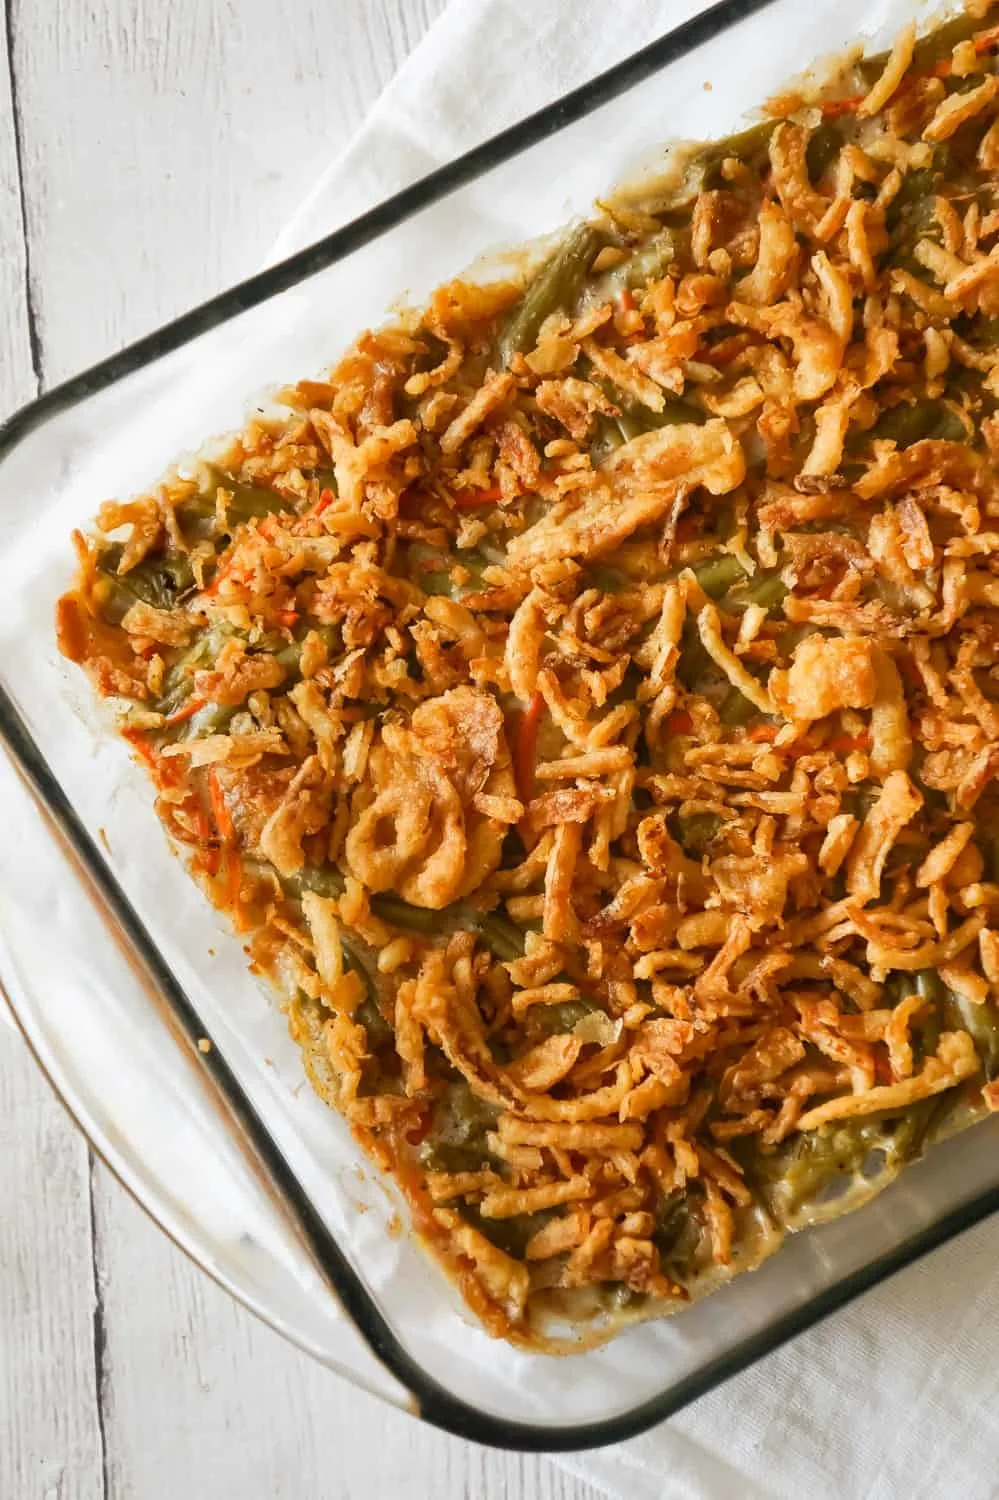 Green Bean Casserole with Campbell's Soup is a simple and delicious side dish recipe made with canned green beans, matchstick carrots, cream of mushroom soup and French's fried onions.